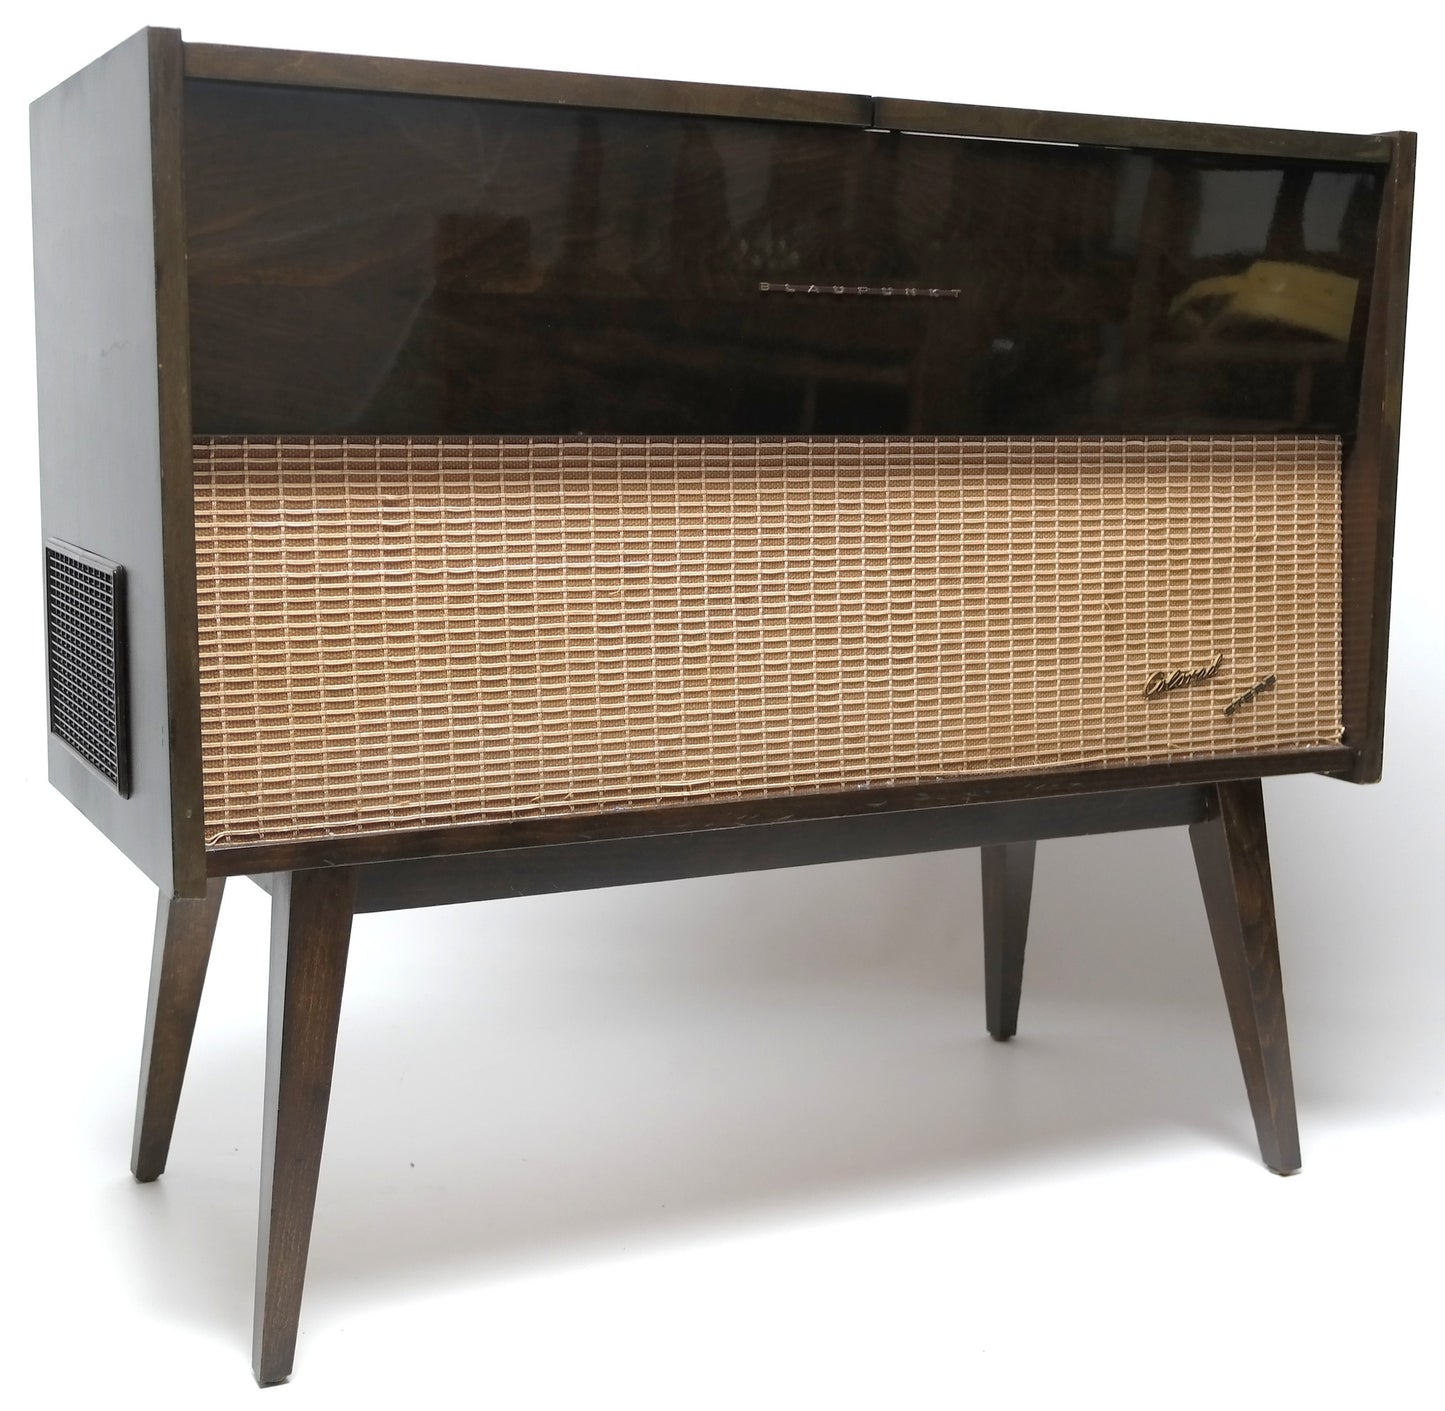 Mid Century Modern Stereo Console By Blaupunkt Record Changer - Bluetooth - AM/FM Tuner Tube amplifer The Vintedge Co.